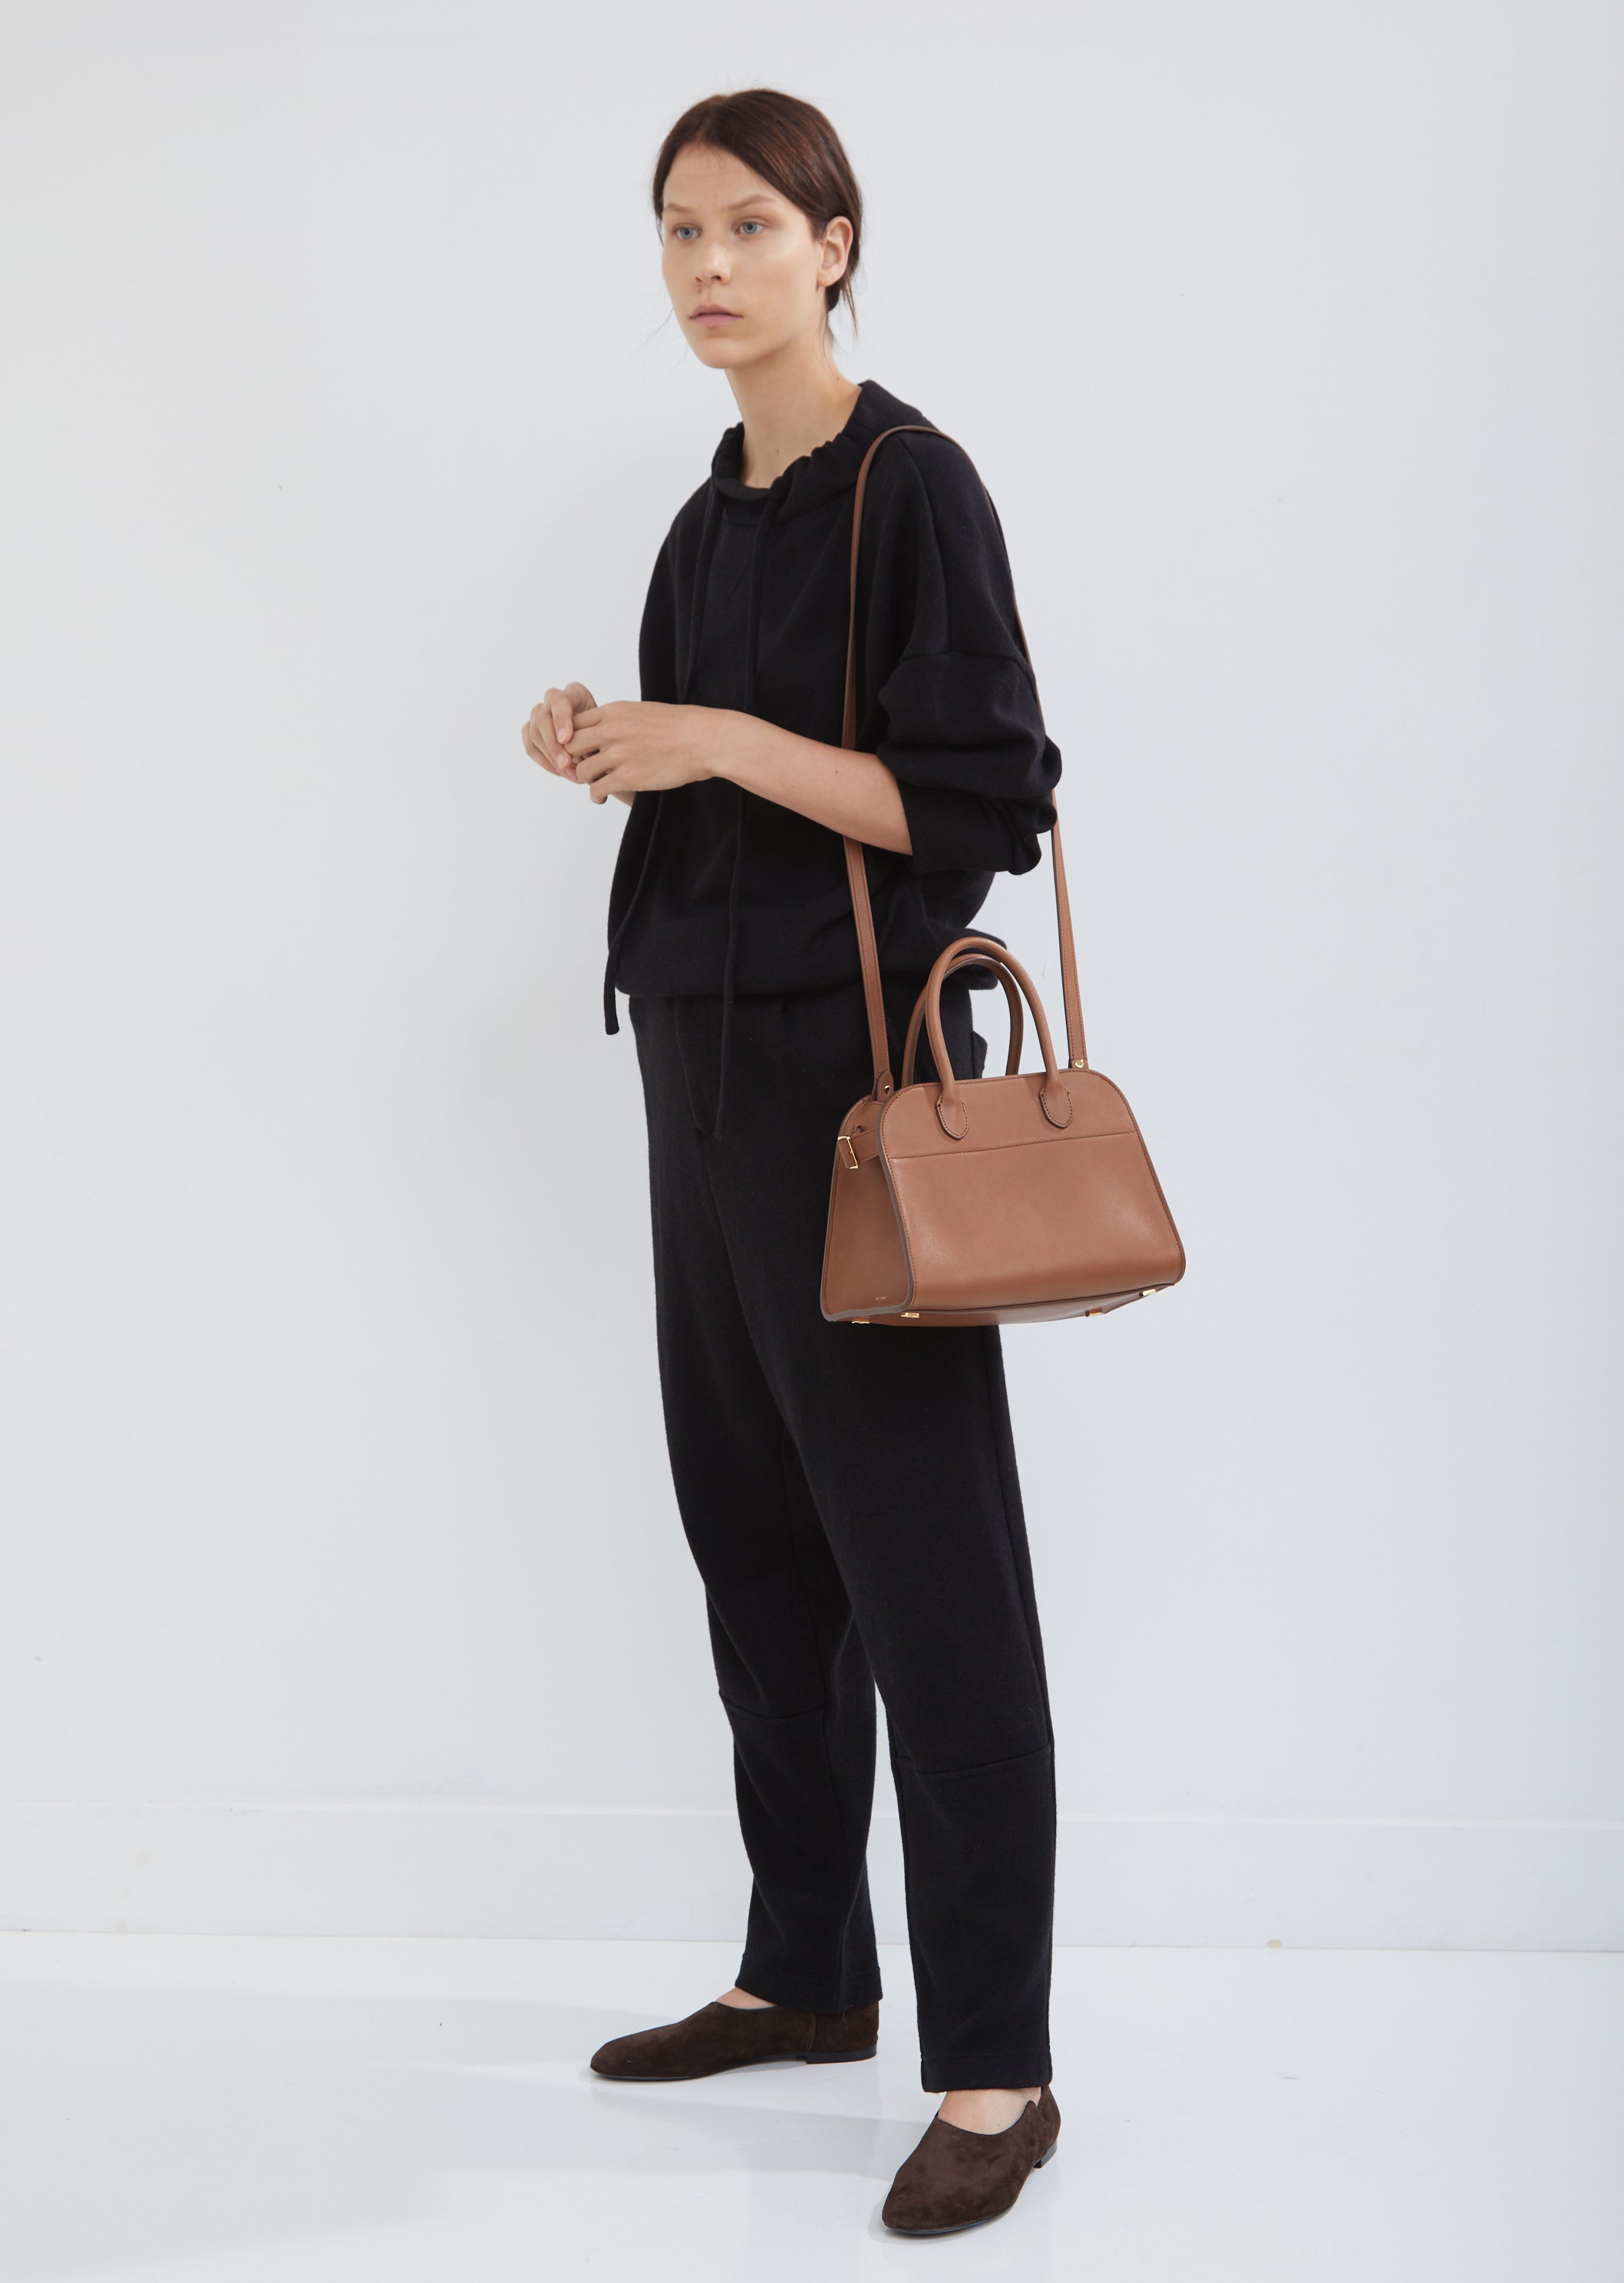 The Row's Margaux Bag Is the Only Item on My Wishlist